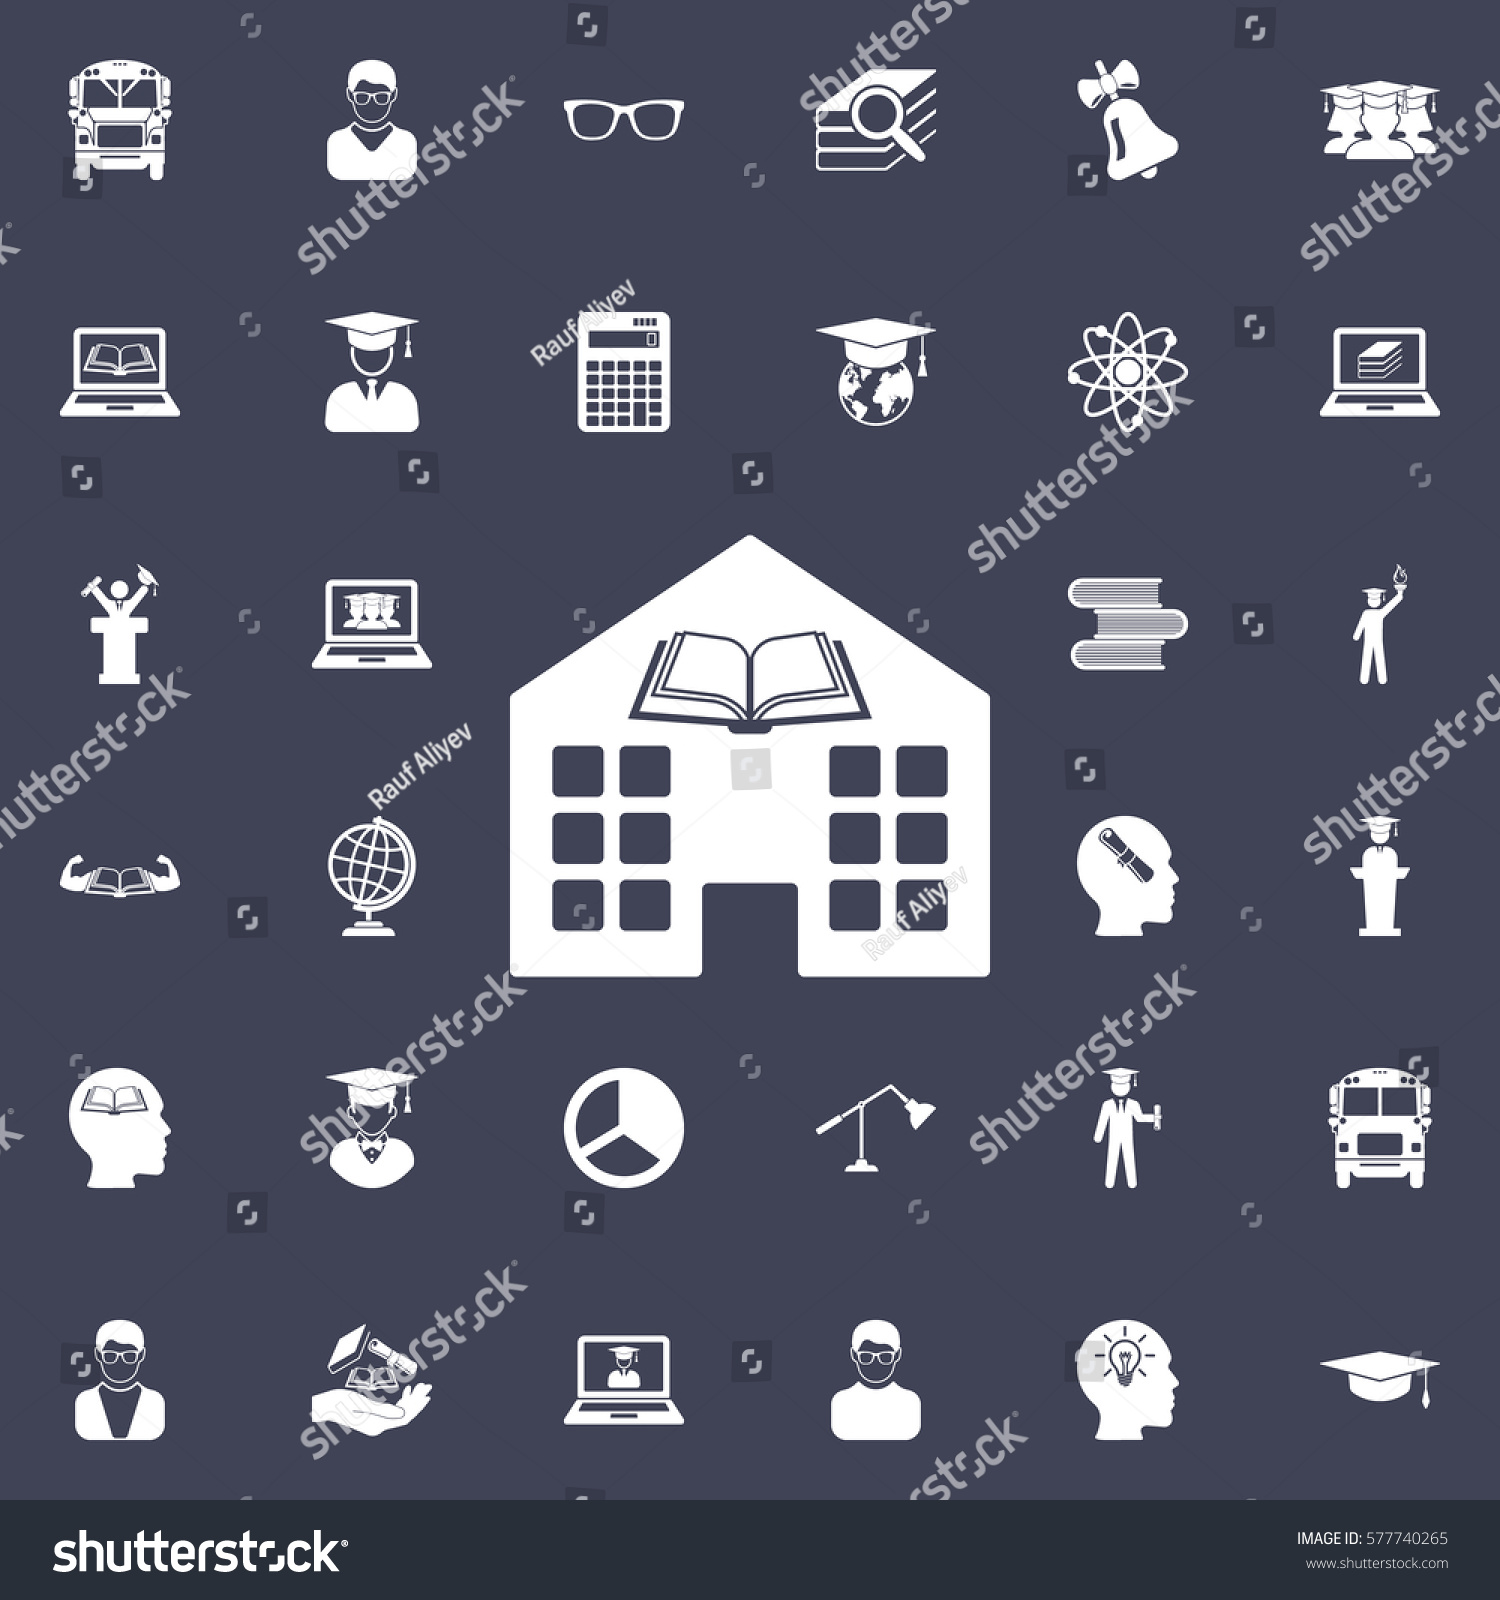 Preview Images: Download Royalty Free Icons and Stock Images For 